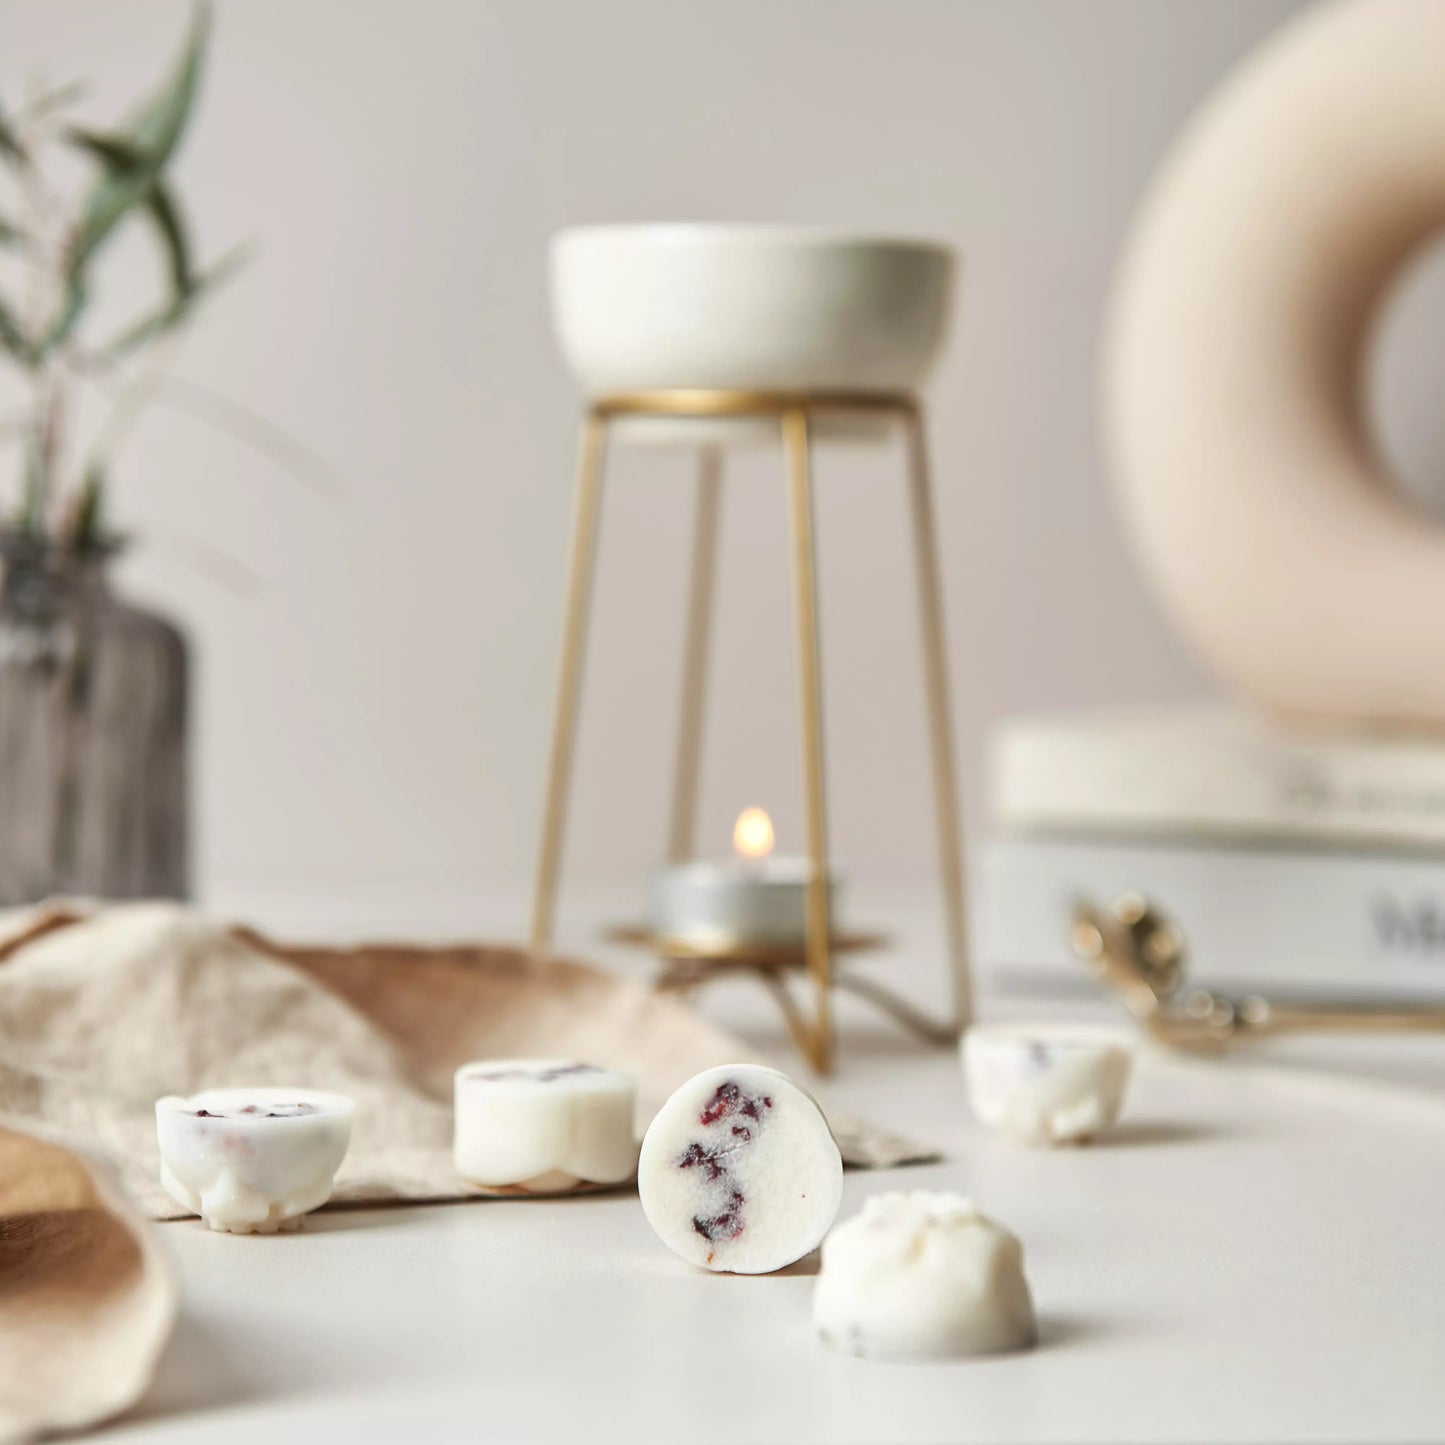 Our Cedarwood and Jasmine Wax Melts are loosely scattered with a bronze wax warmer and a tea light in the background.